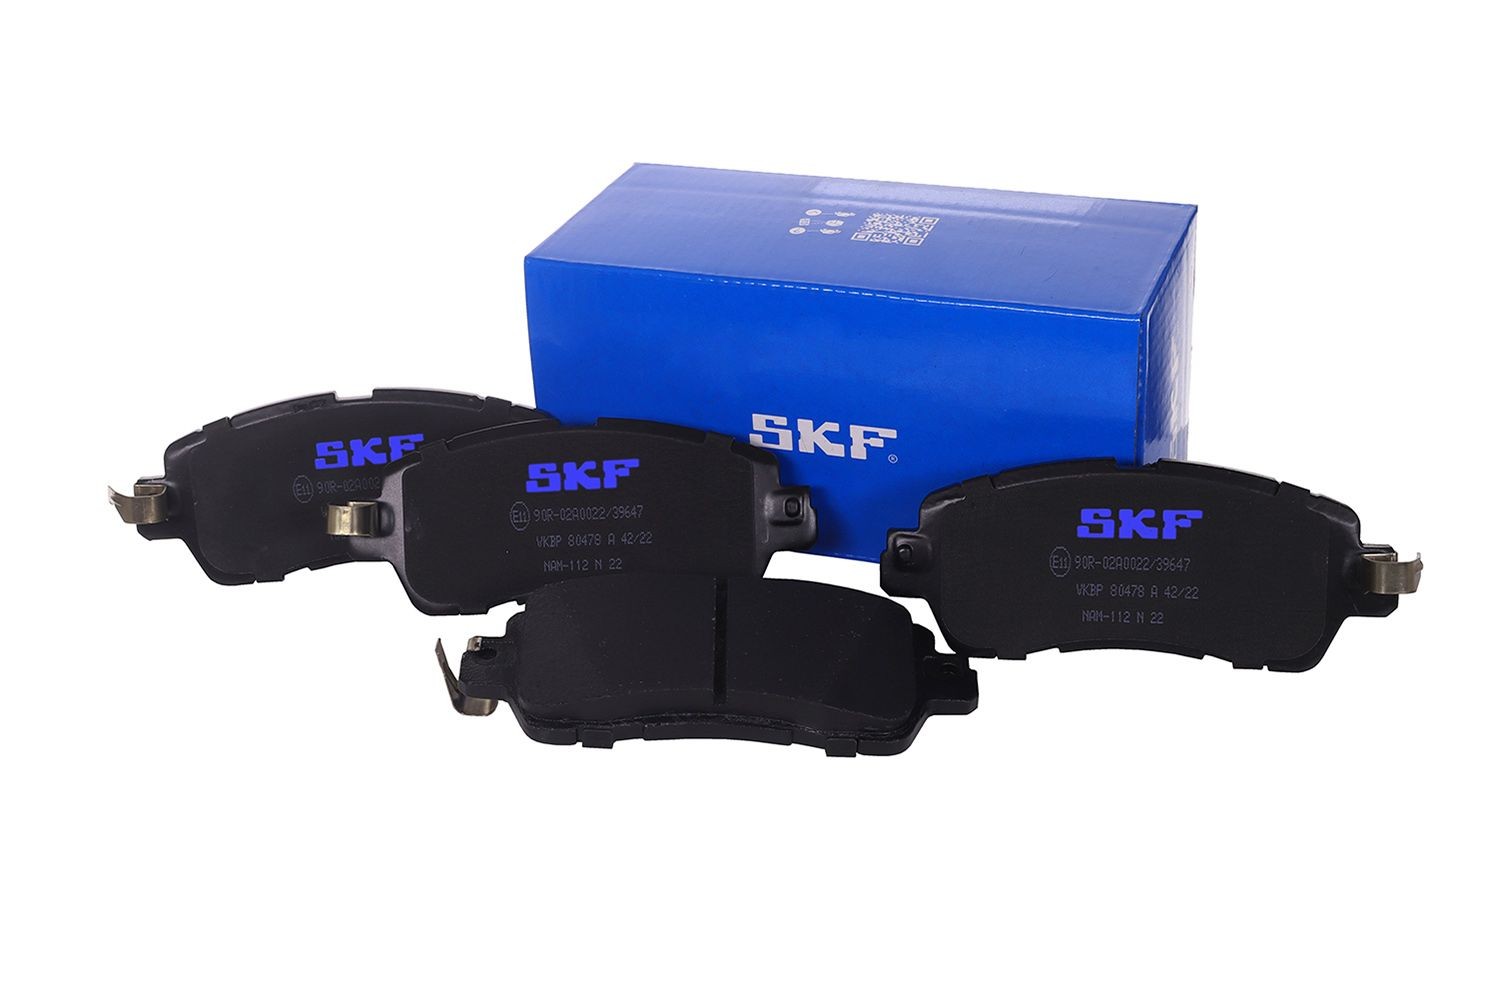 22235 SKF with acoustic wear warning Height: 51,5mm, Thickness: 15,8mm Brake pads VKBP 80478 A buy